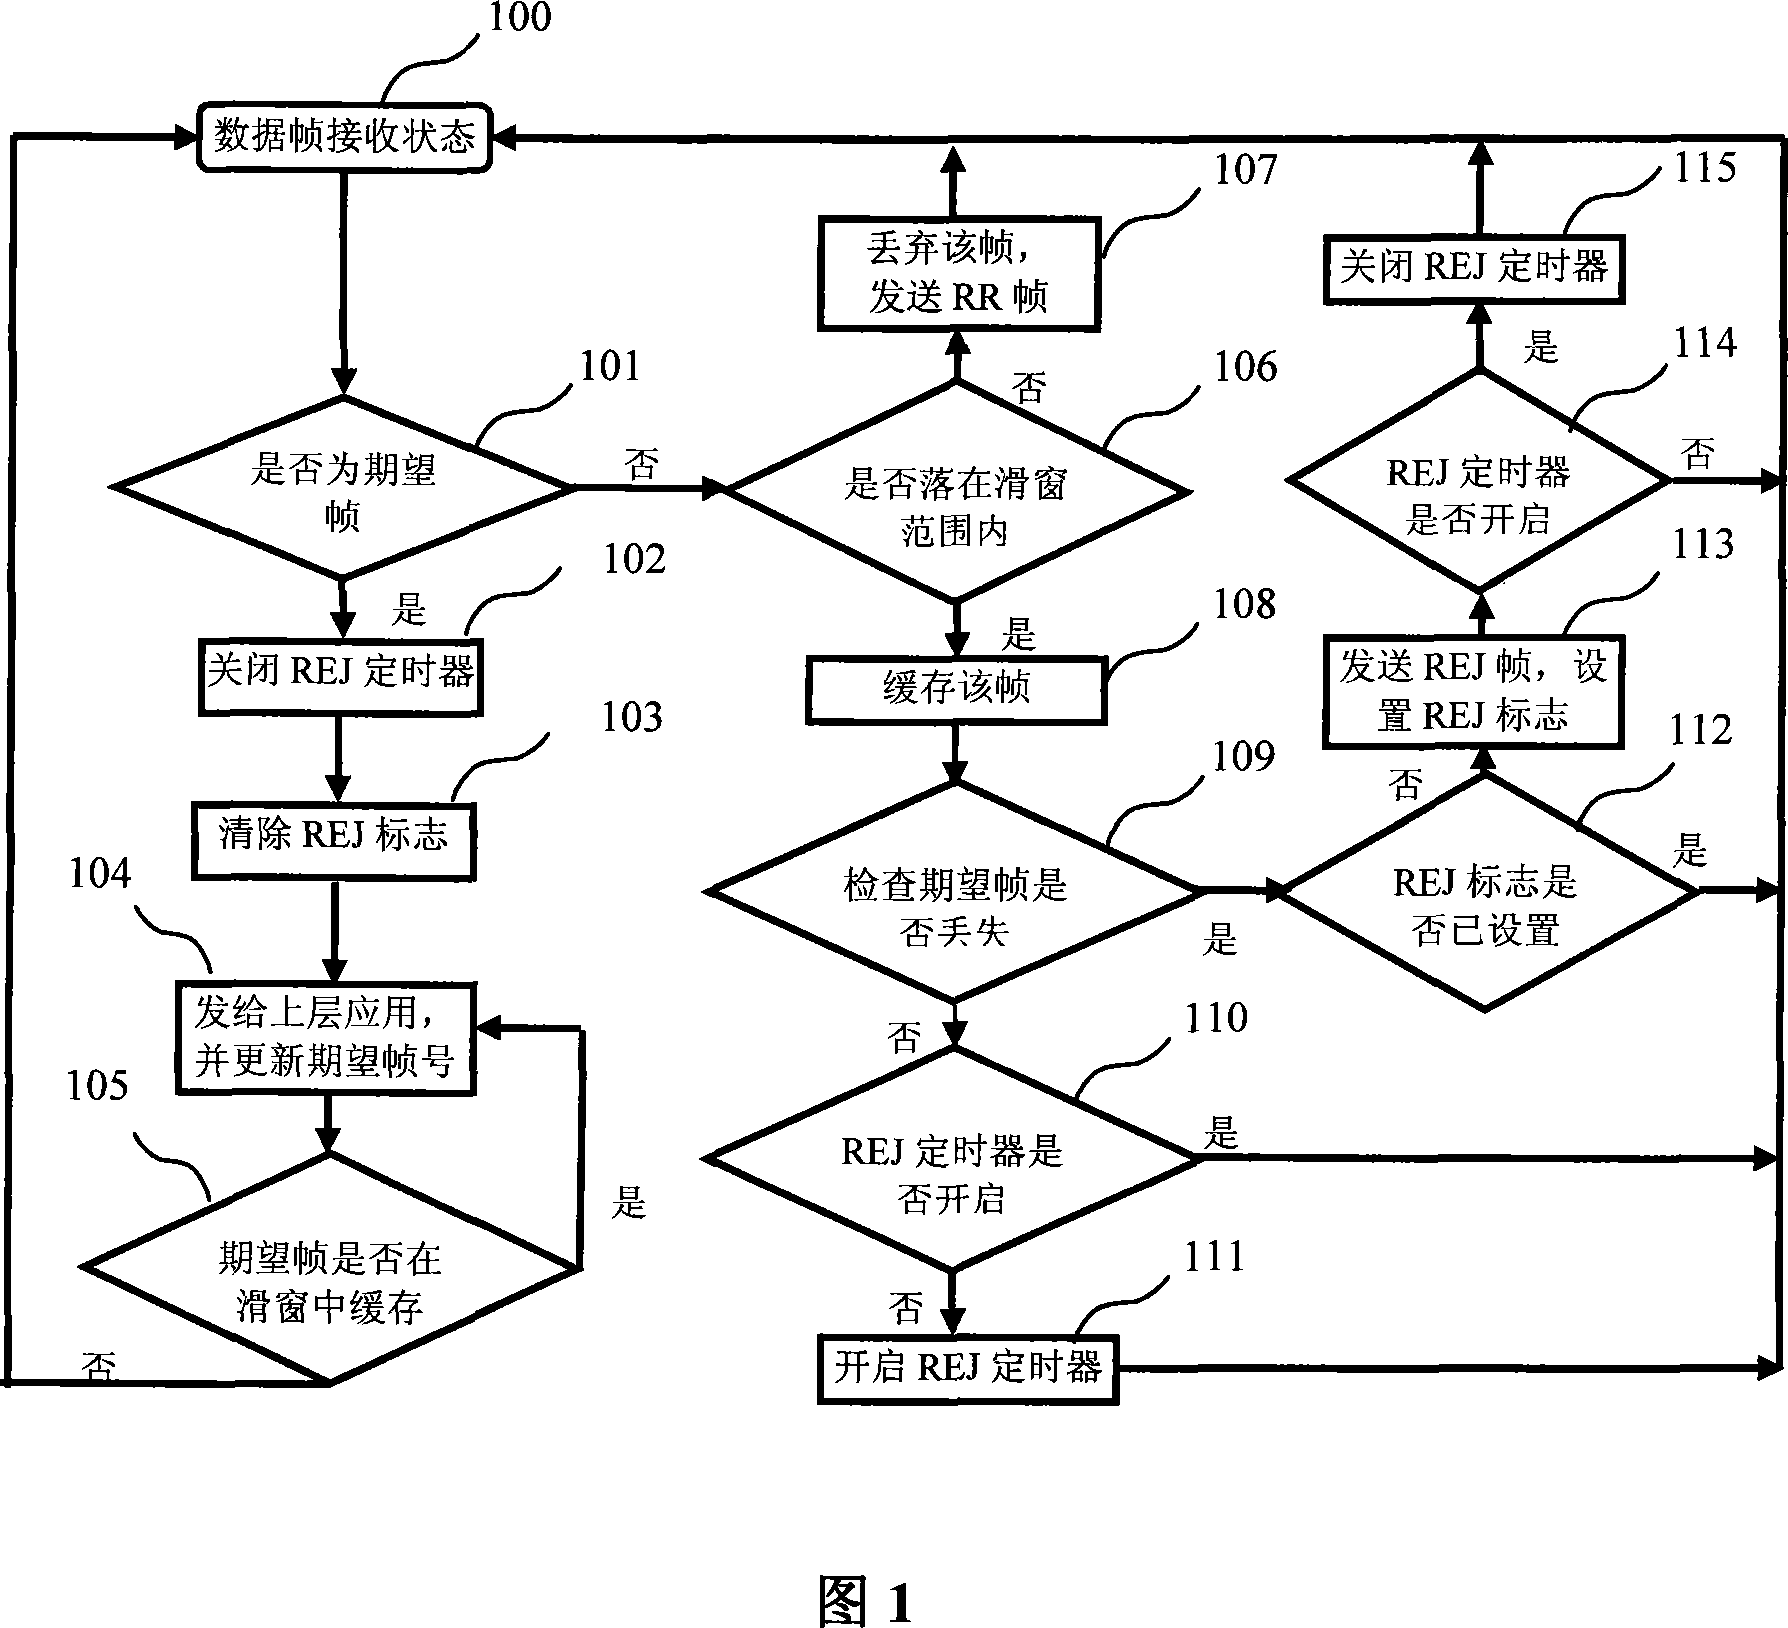 A realization method for D channel link access regulation